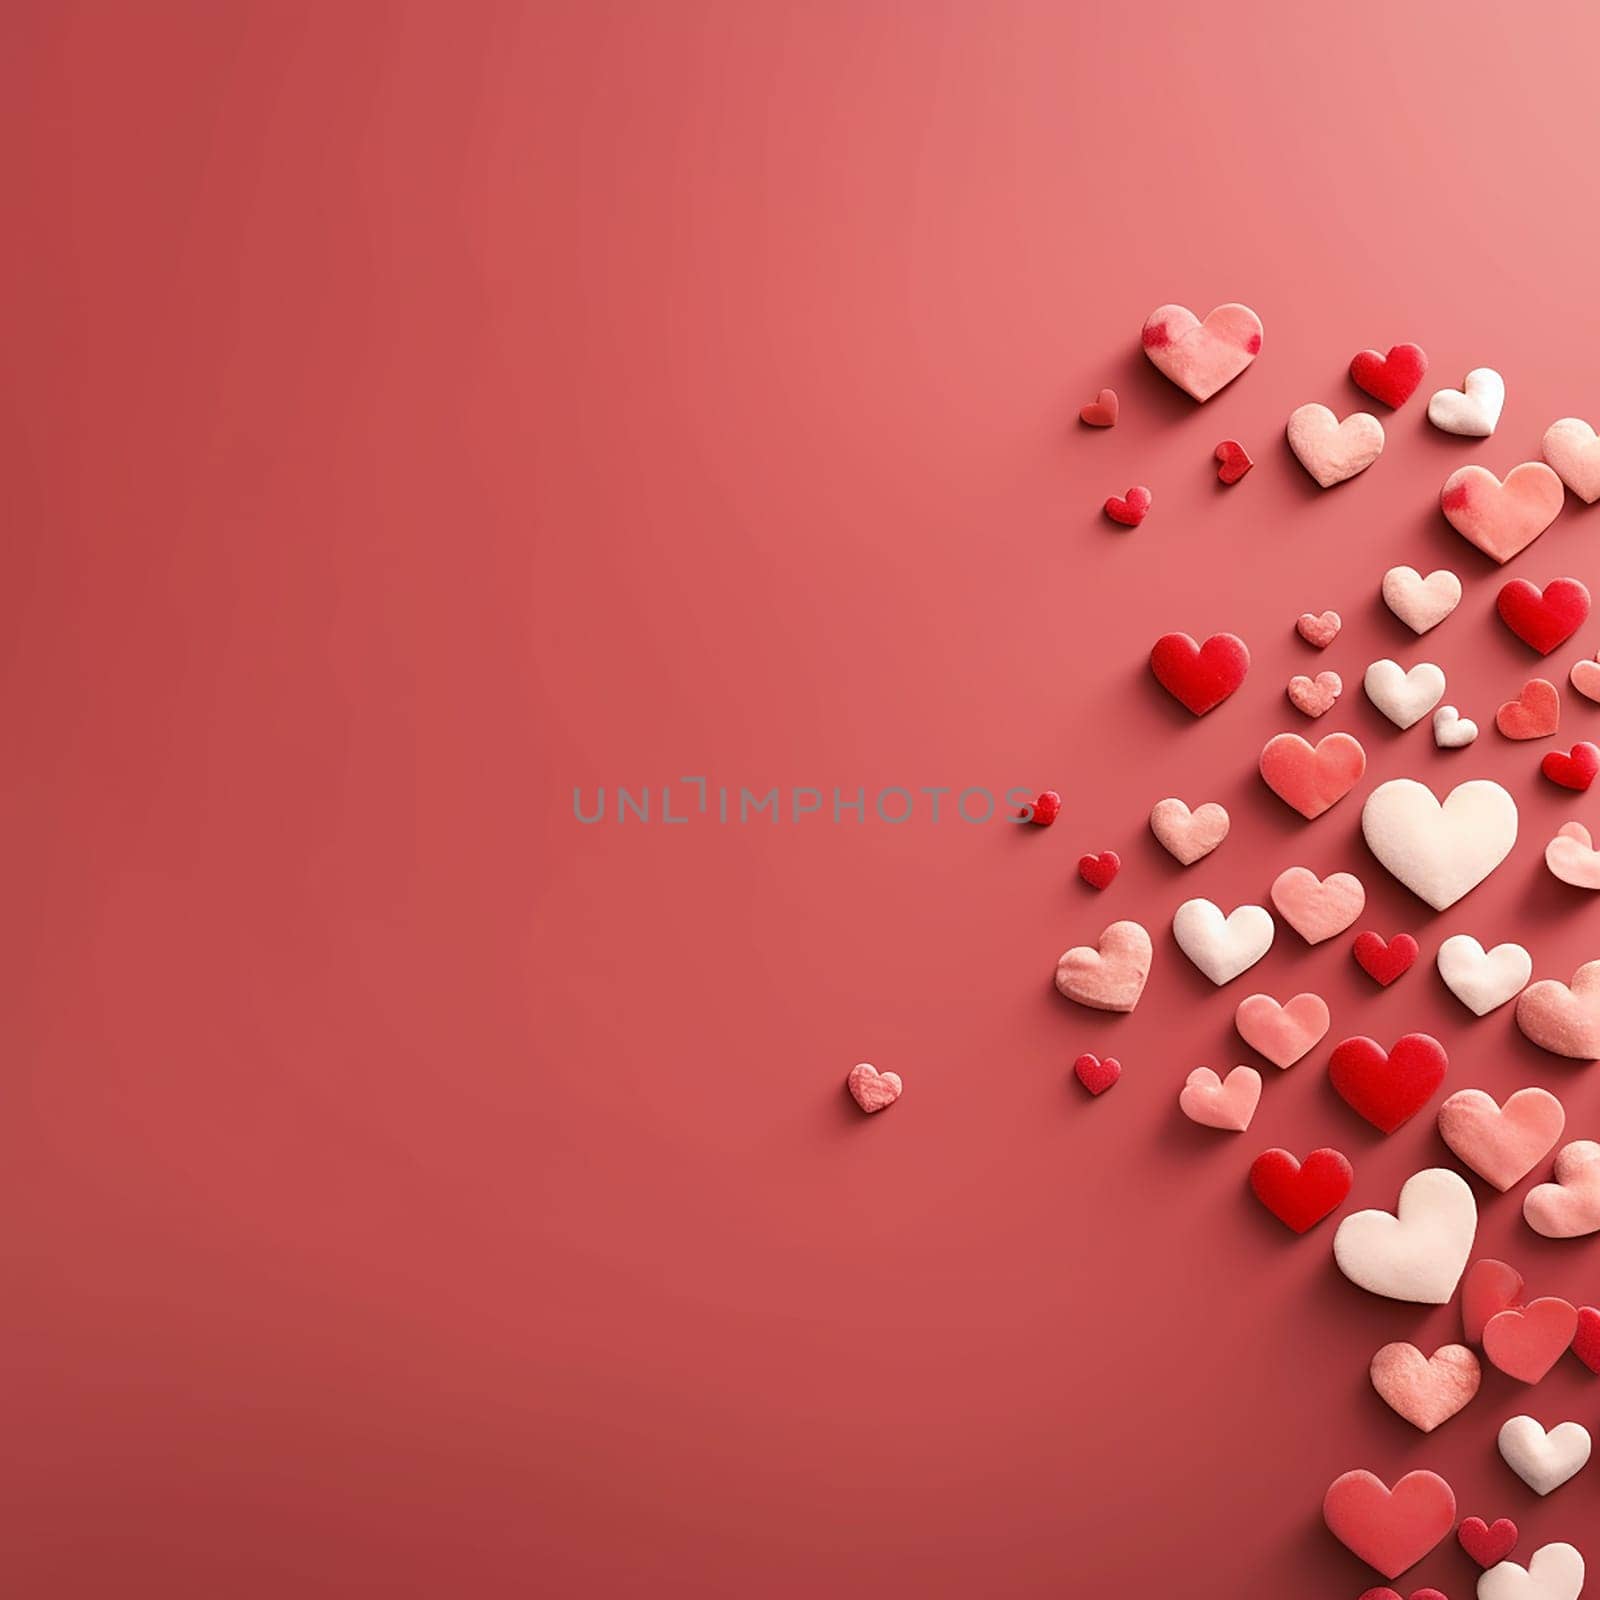 Assorted heart shapes on a red background, symbolizing love and Valentine's Day. by Hype2art